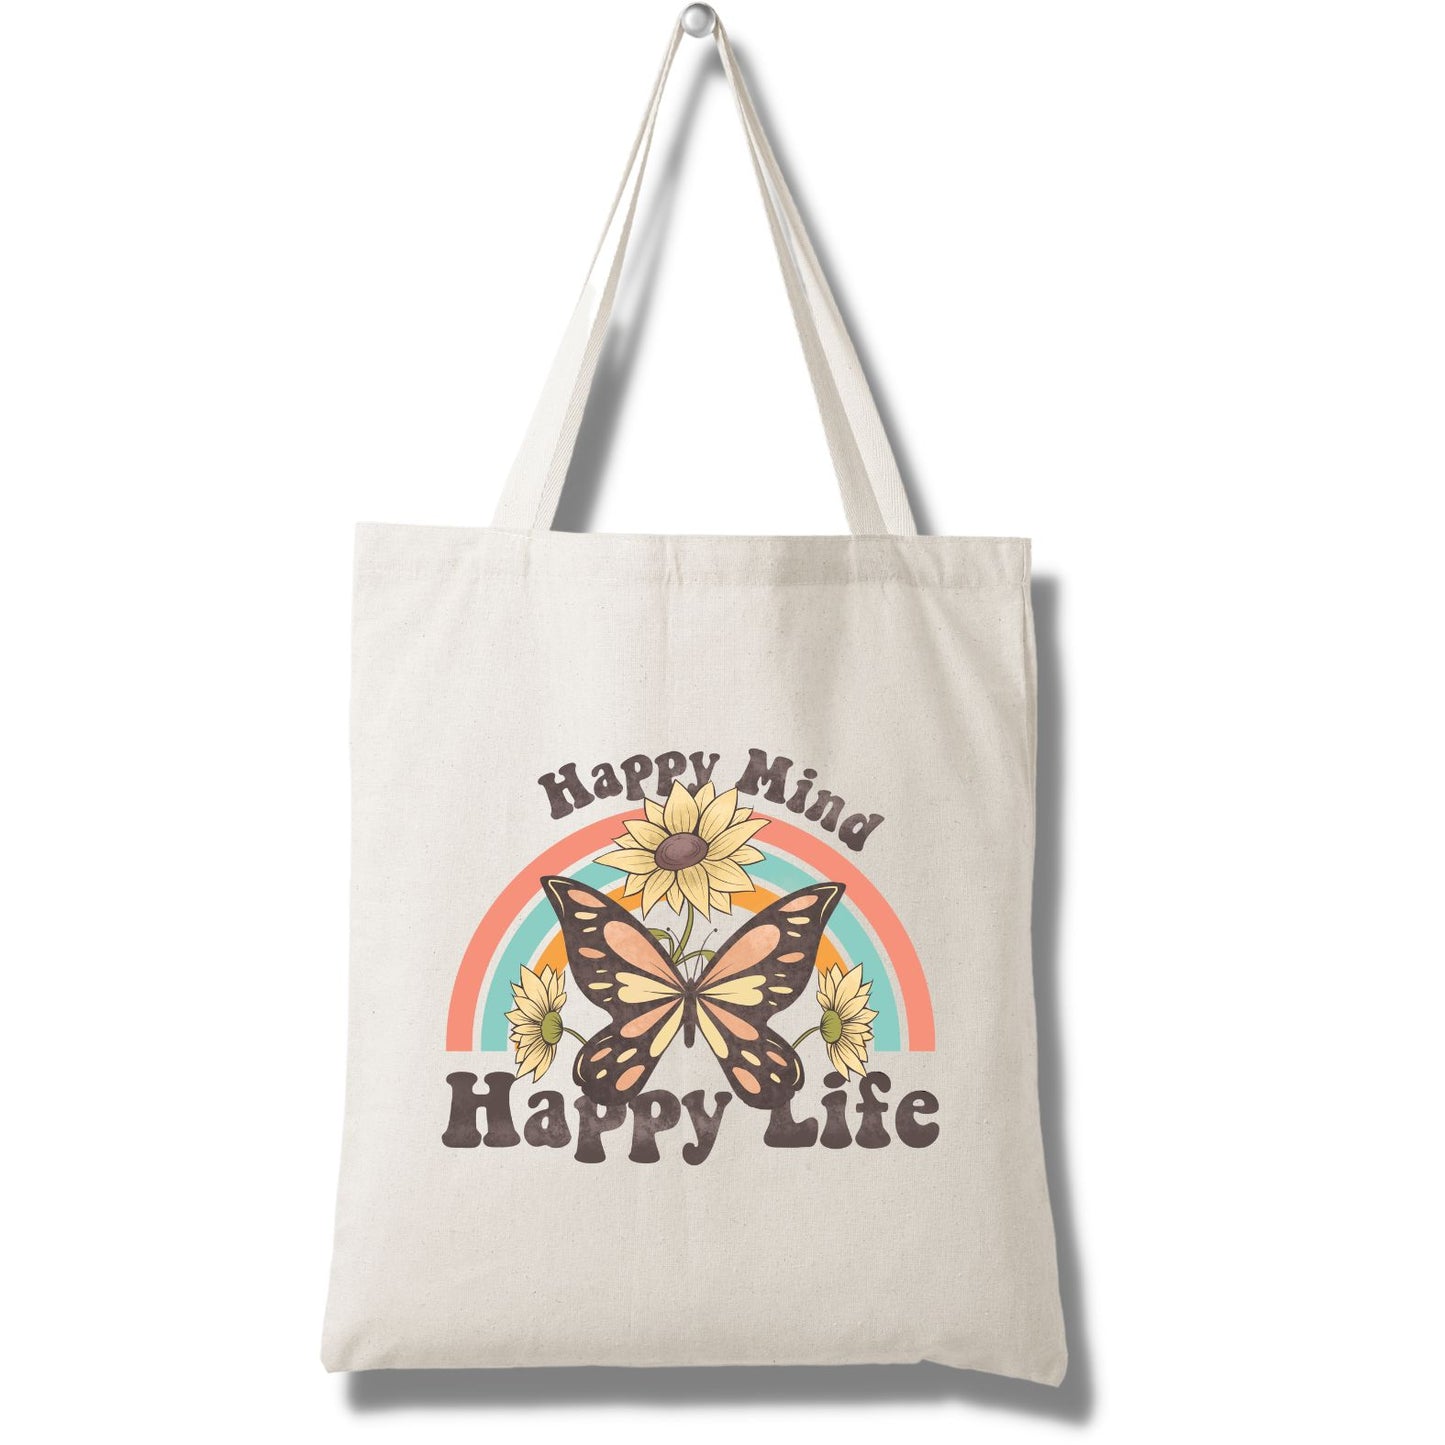 Shopping bag aesthetic 100% cotone naturale | Mod. Happy mind